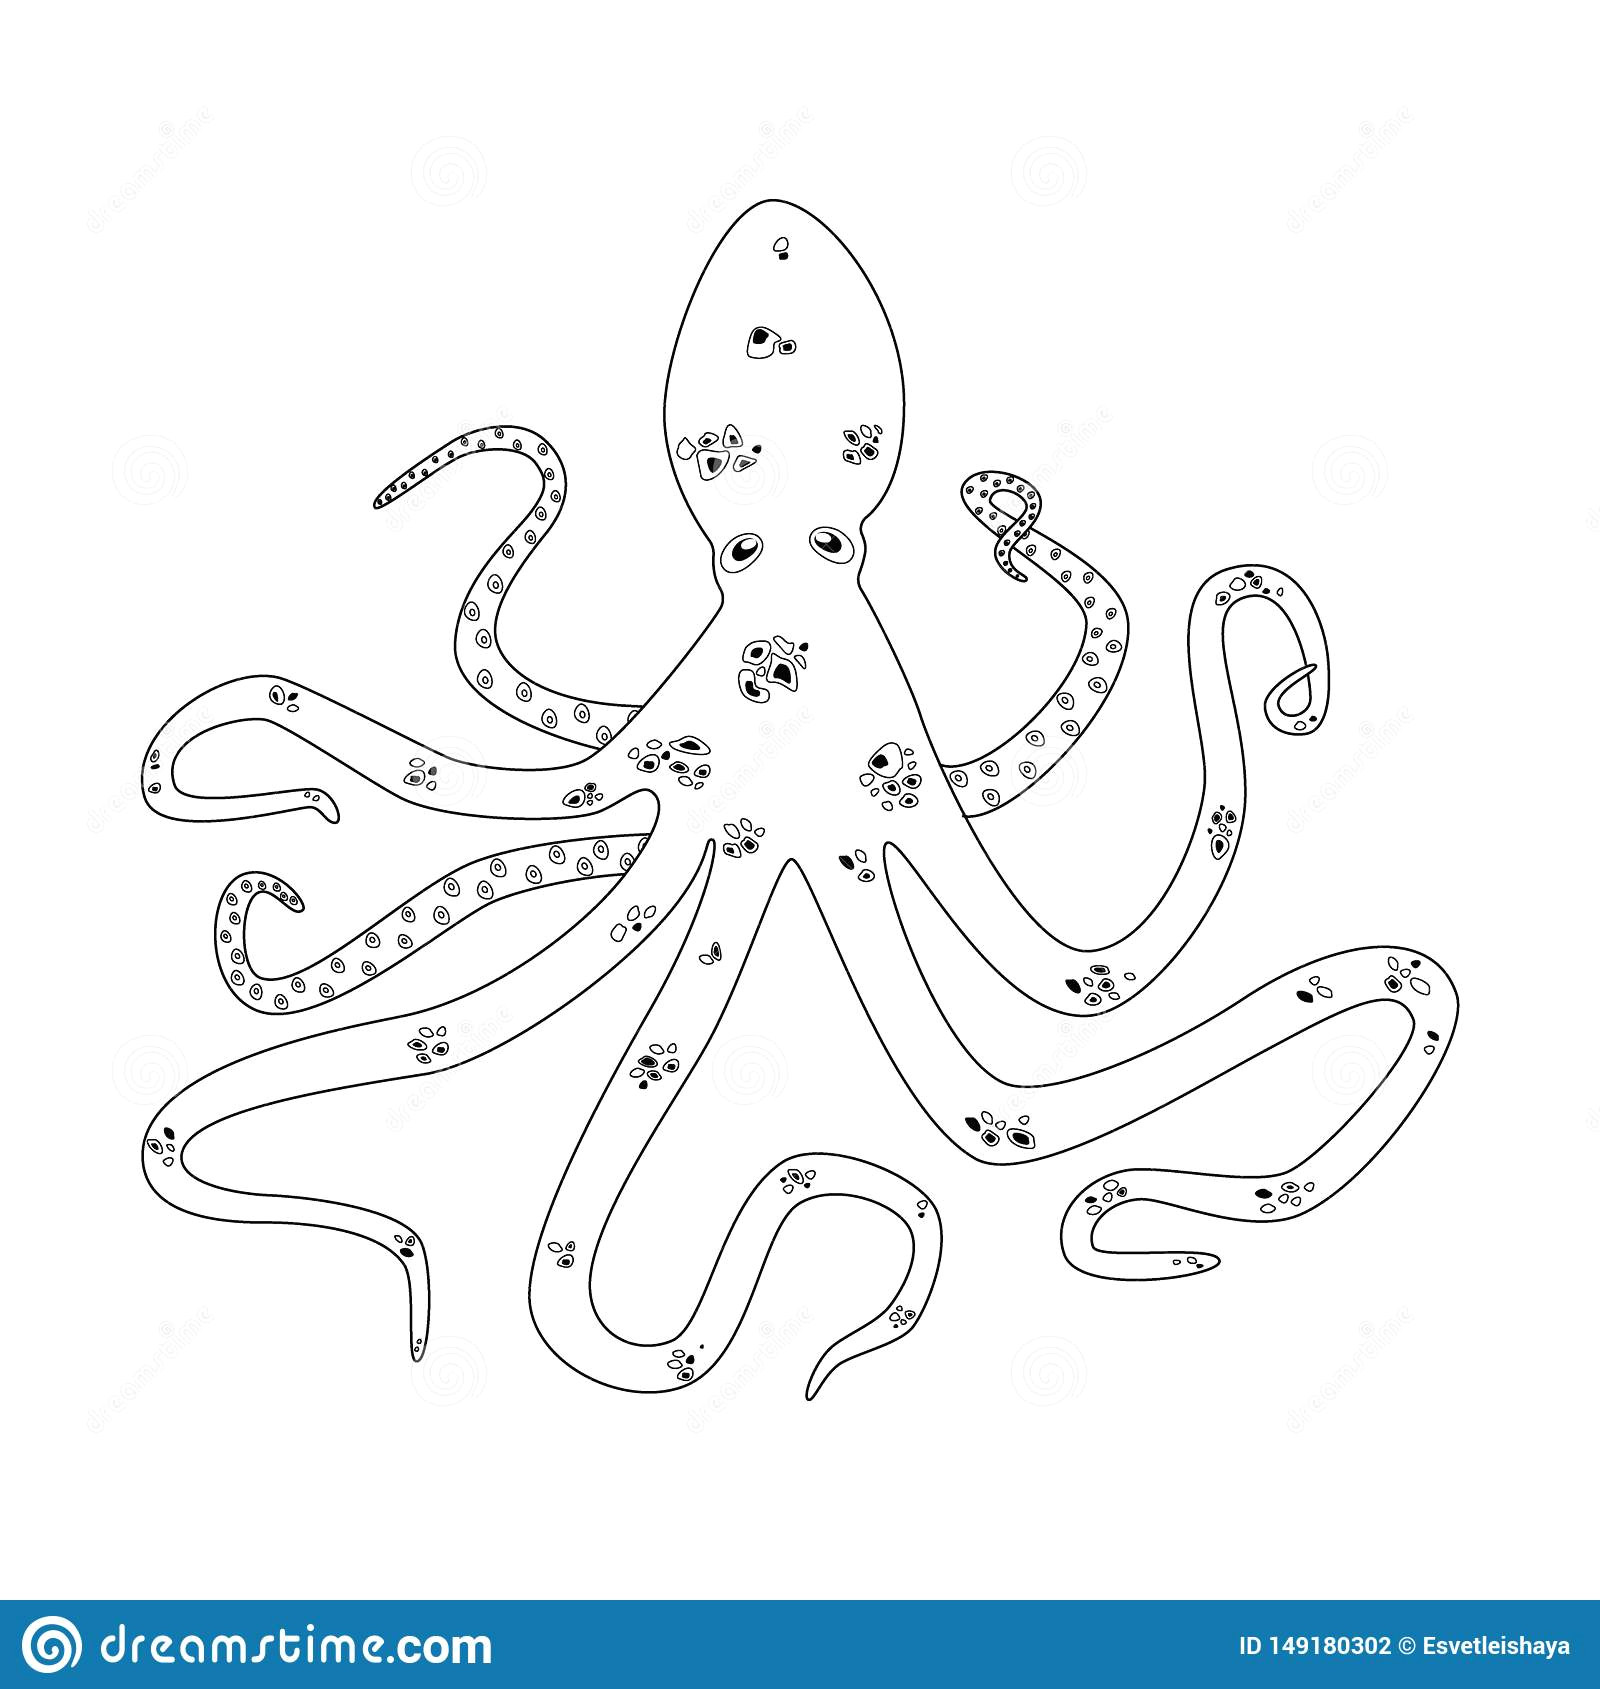 octopus outline vector icon realistic silhouette coloring book 149180302 jpg